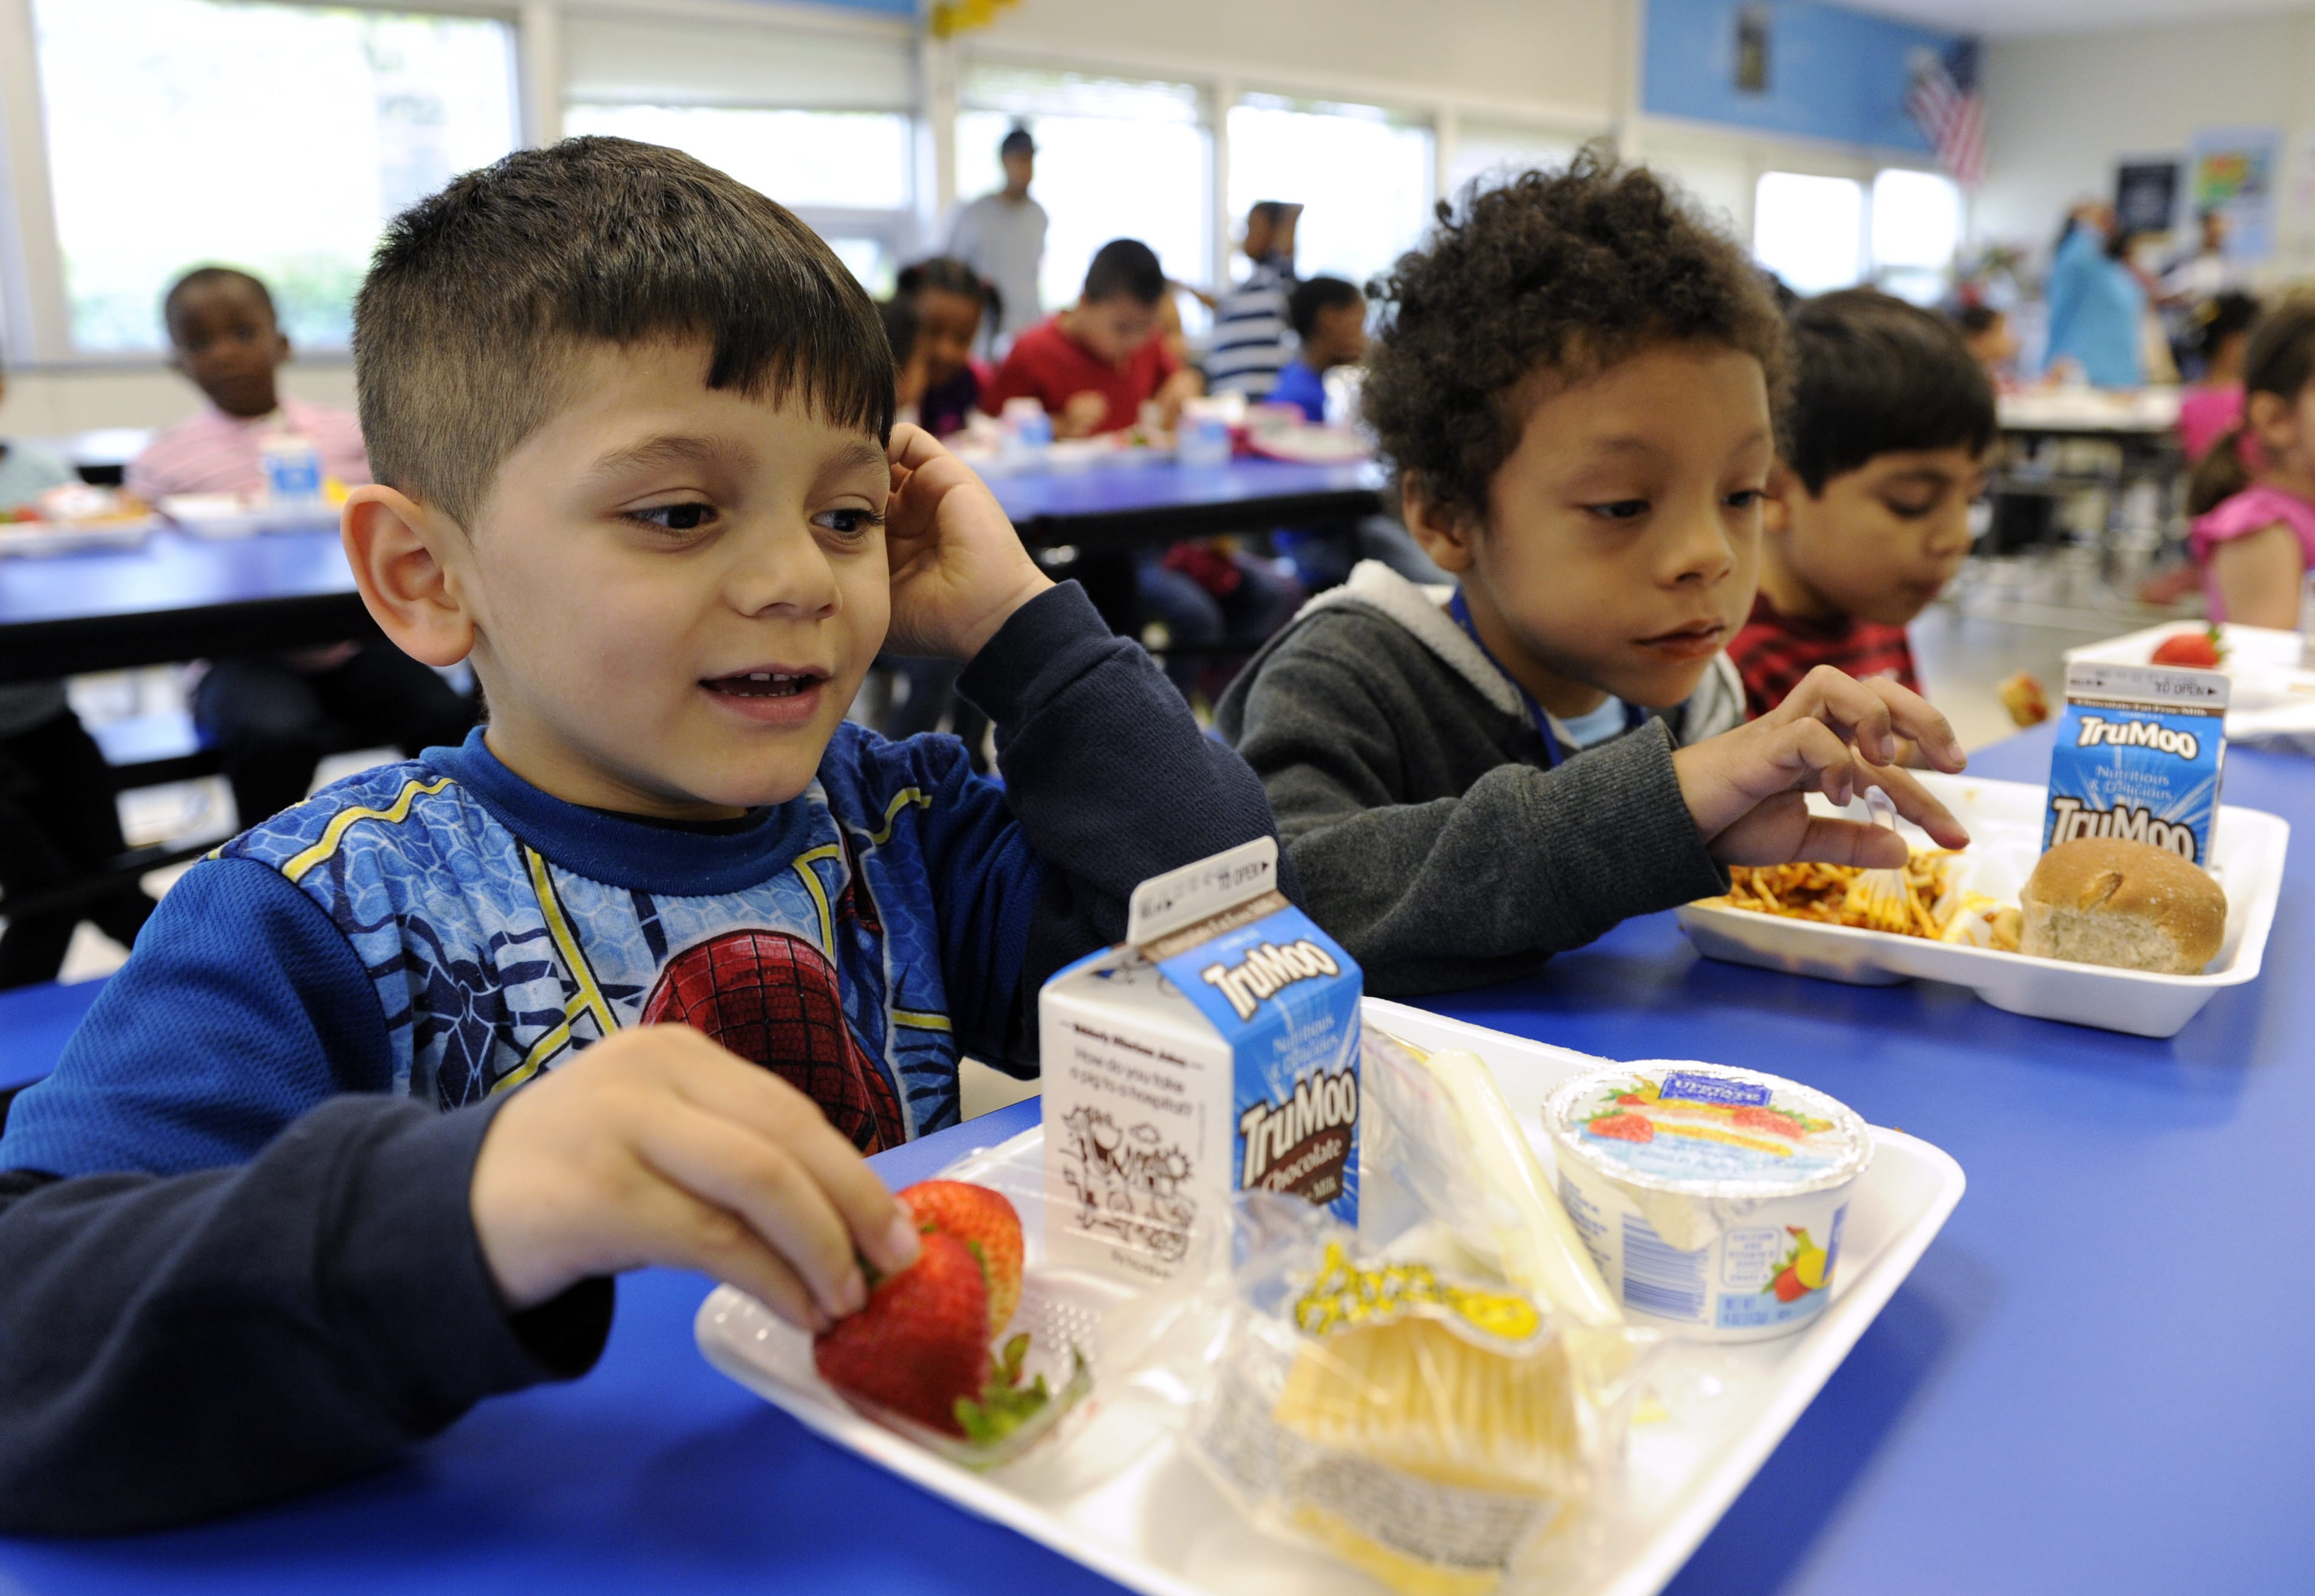 In this Tuesday, April 29, 2014 photo, Biden Arias-Romers, 5, left, and Nathaniel Cossio-Boatwright, 6, eat lunch at the Patrick Henry Elementary School in Alexandria, Va. Starting next school year, pasta and other grain products in schools will have to be whole-grain rich, or more than half whole grain. The requirement is part of a government effort to make school lunches and breakfasts healthier.